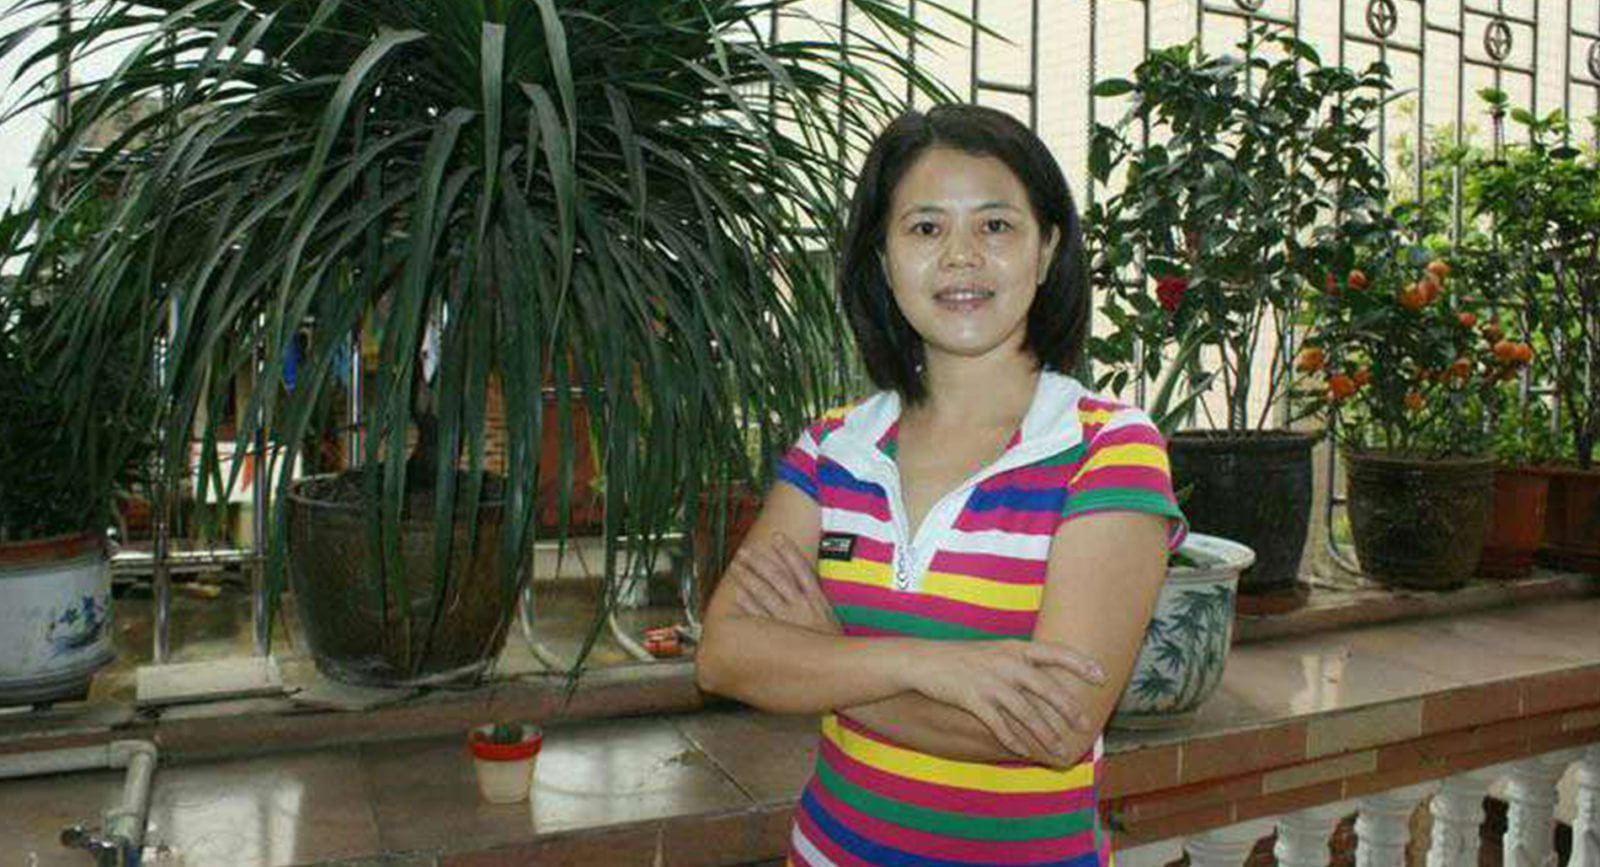 Chinese women's rights activist Su Changlan smiles into the camera with arms crossed